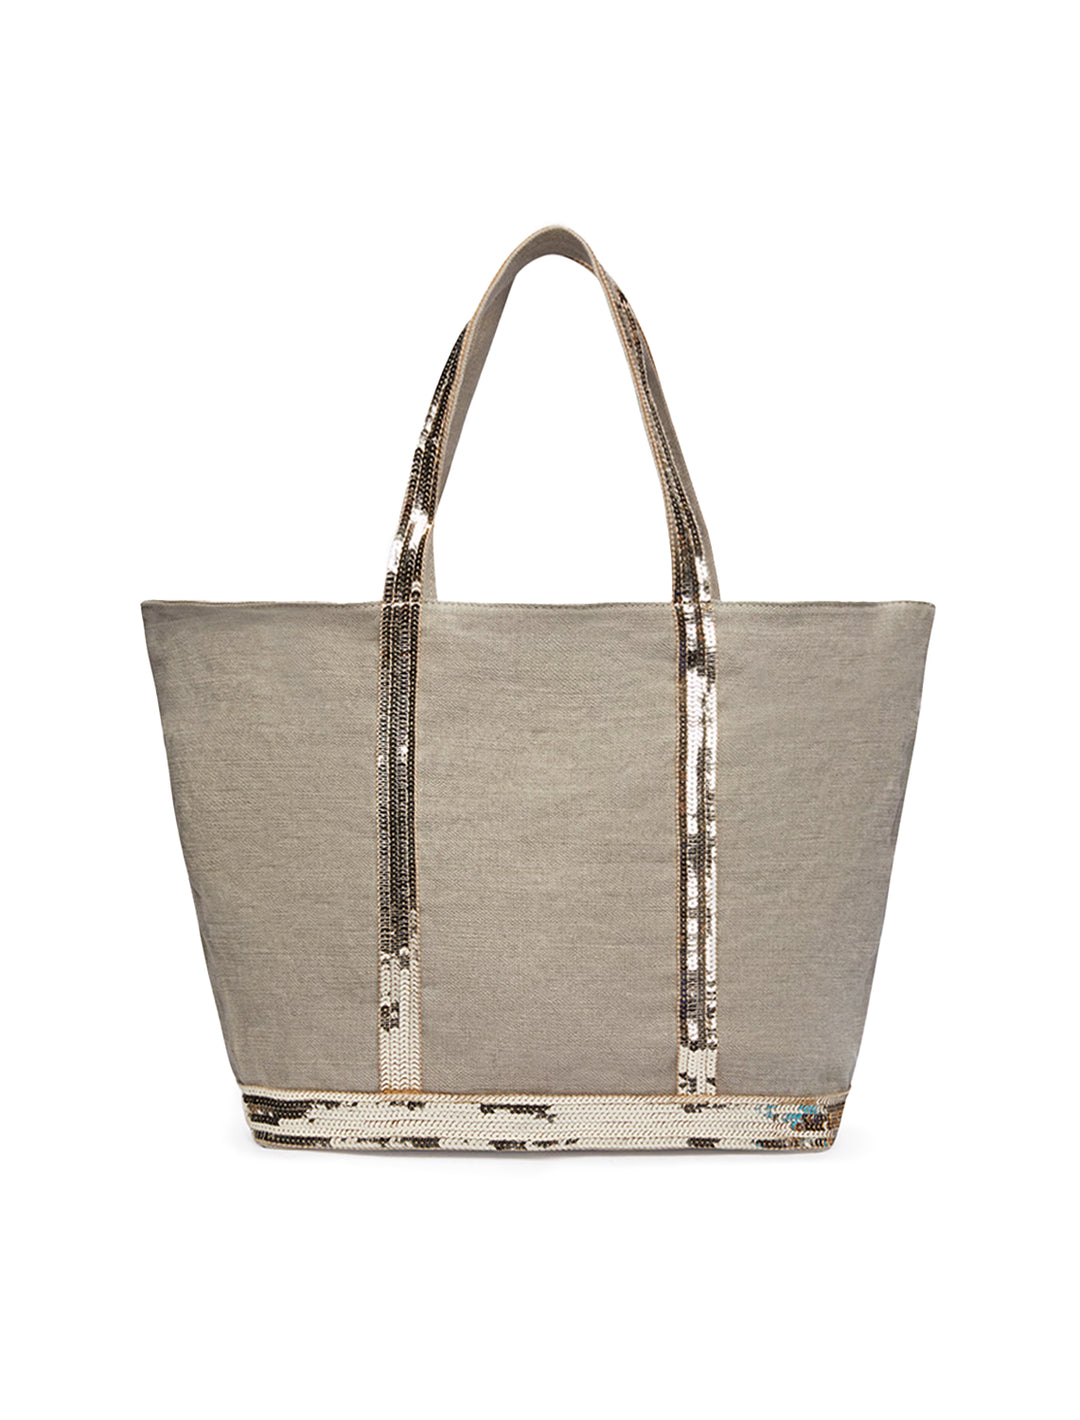 Front view of Vanessa Bruno's cabas large tote in sable.